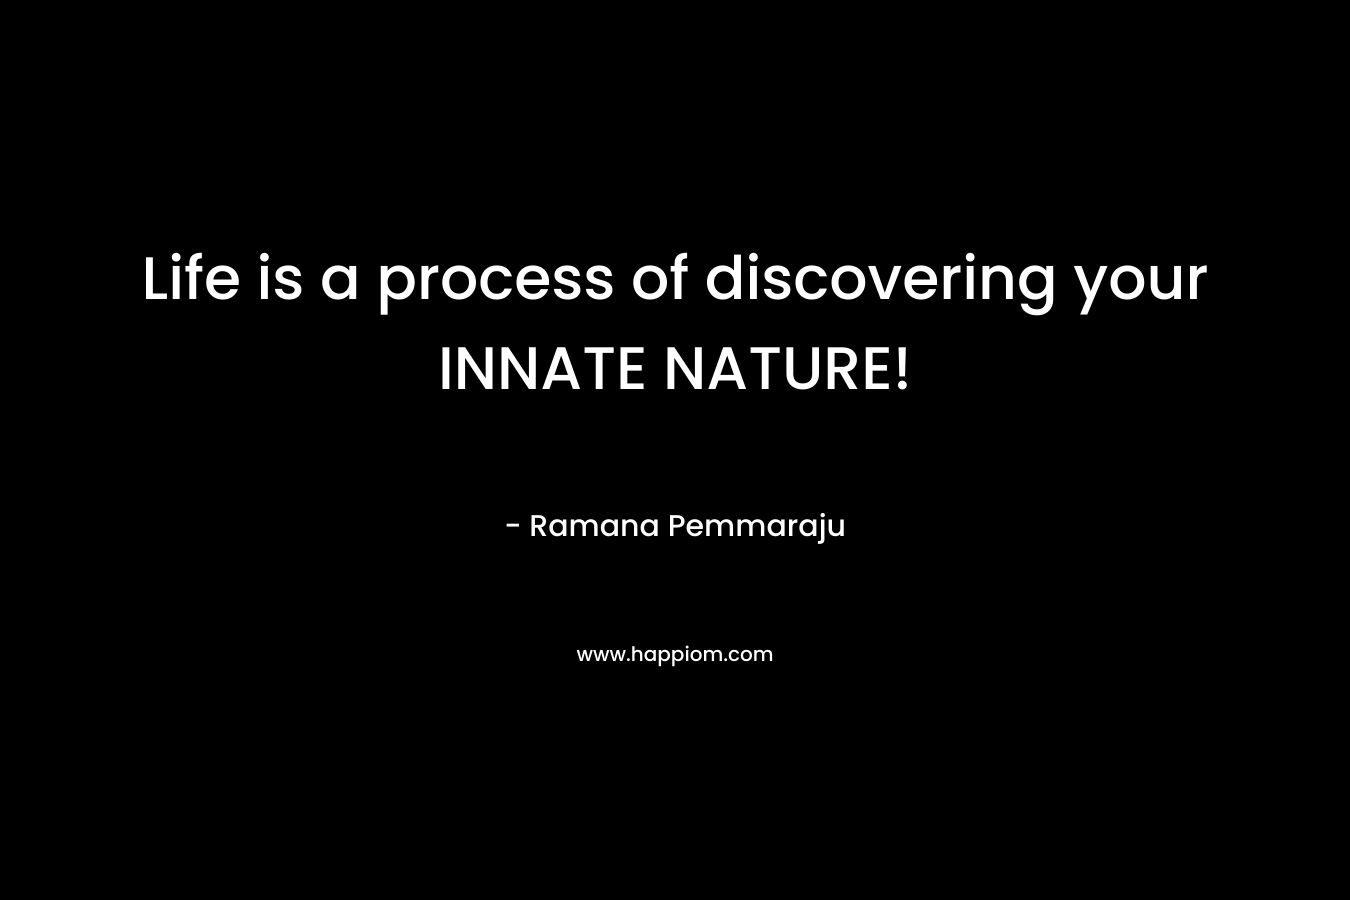 Life is a process of discovering your INNATE NATURE!